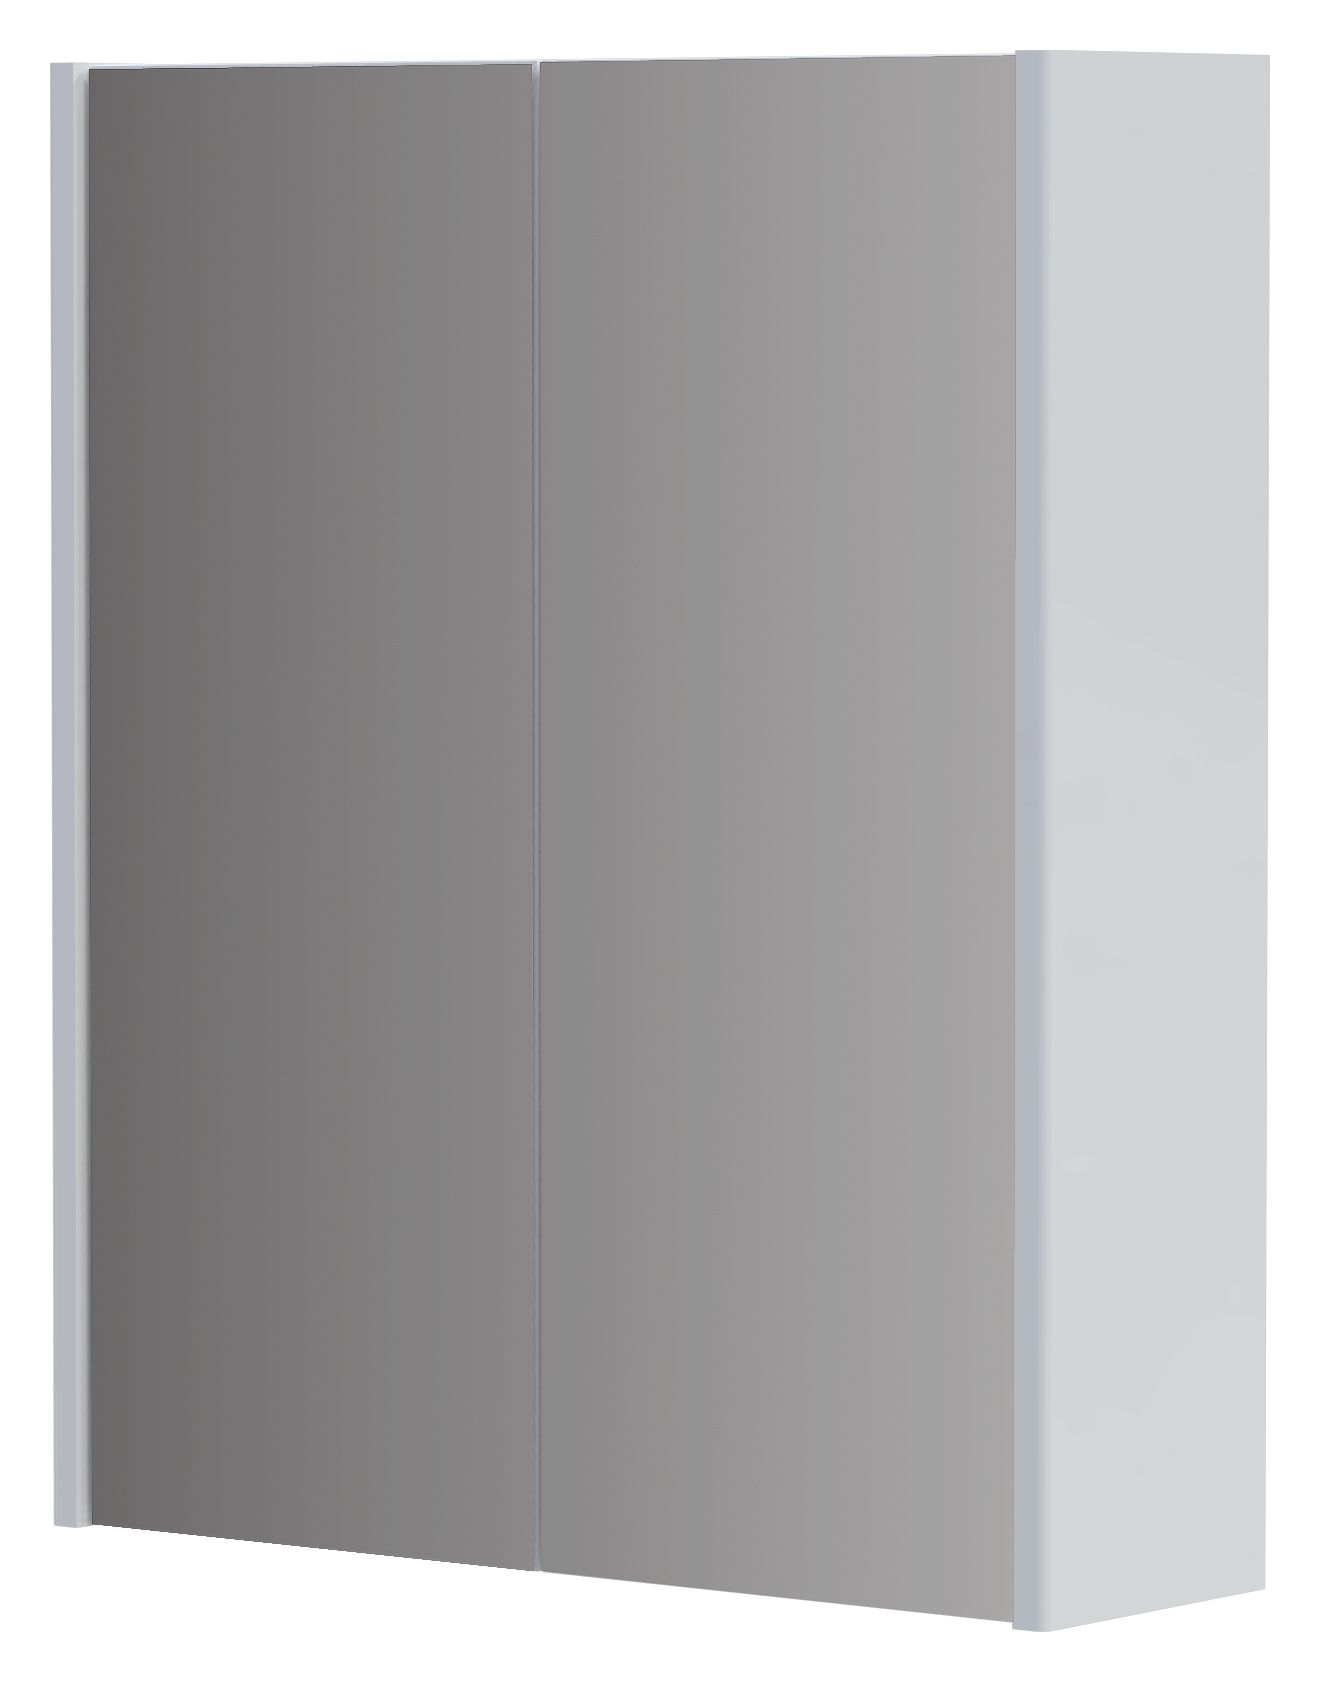 Image of Wickes Semi-Frameless White Double Mirror Bathroom Cabinet - 600 x 500mm